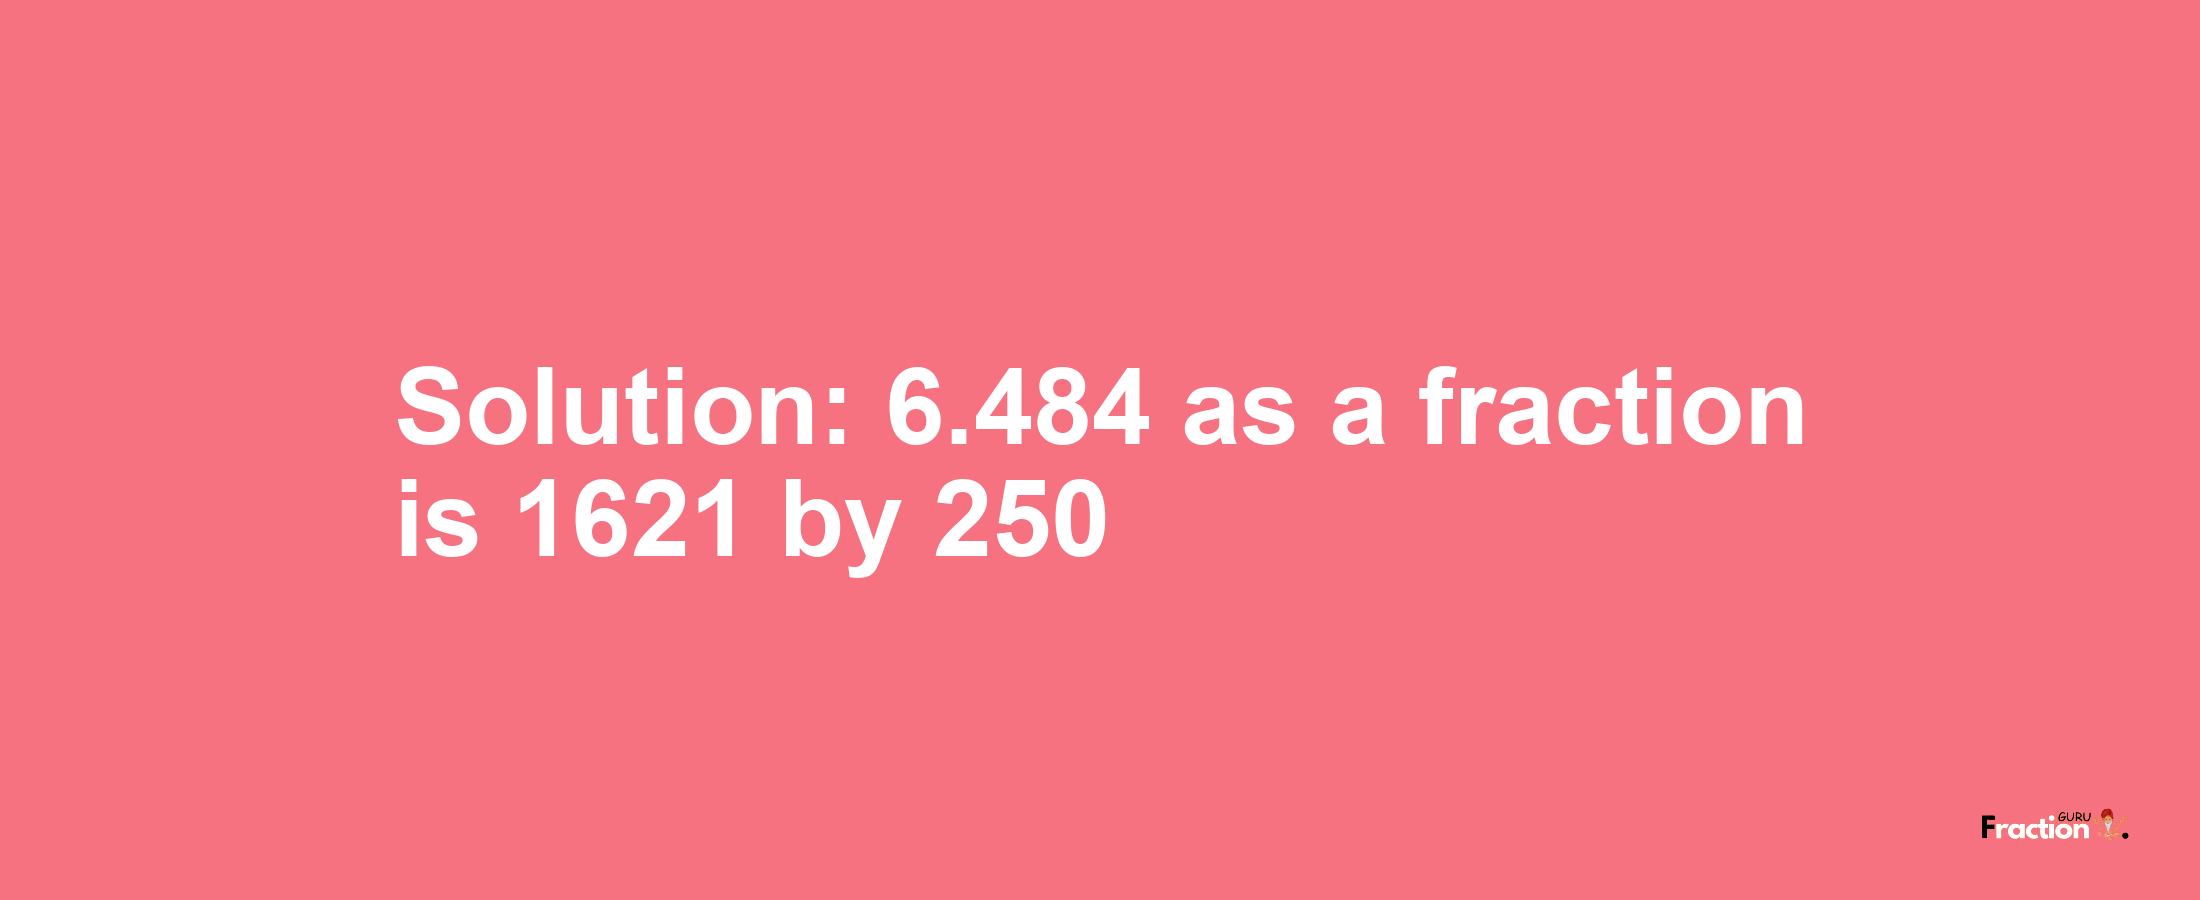 Solution:6.484 as a fraction is 1621/250